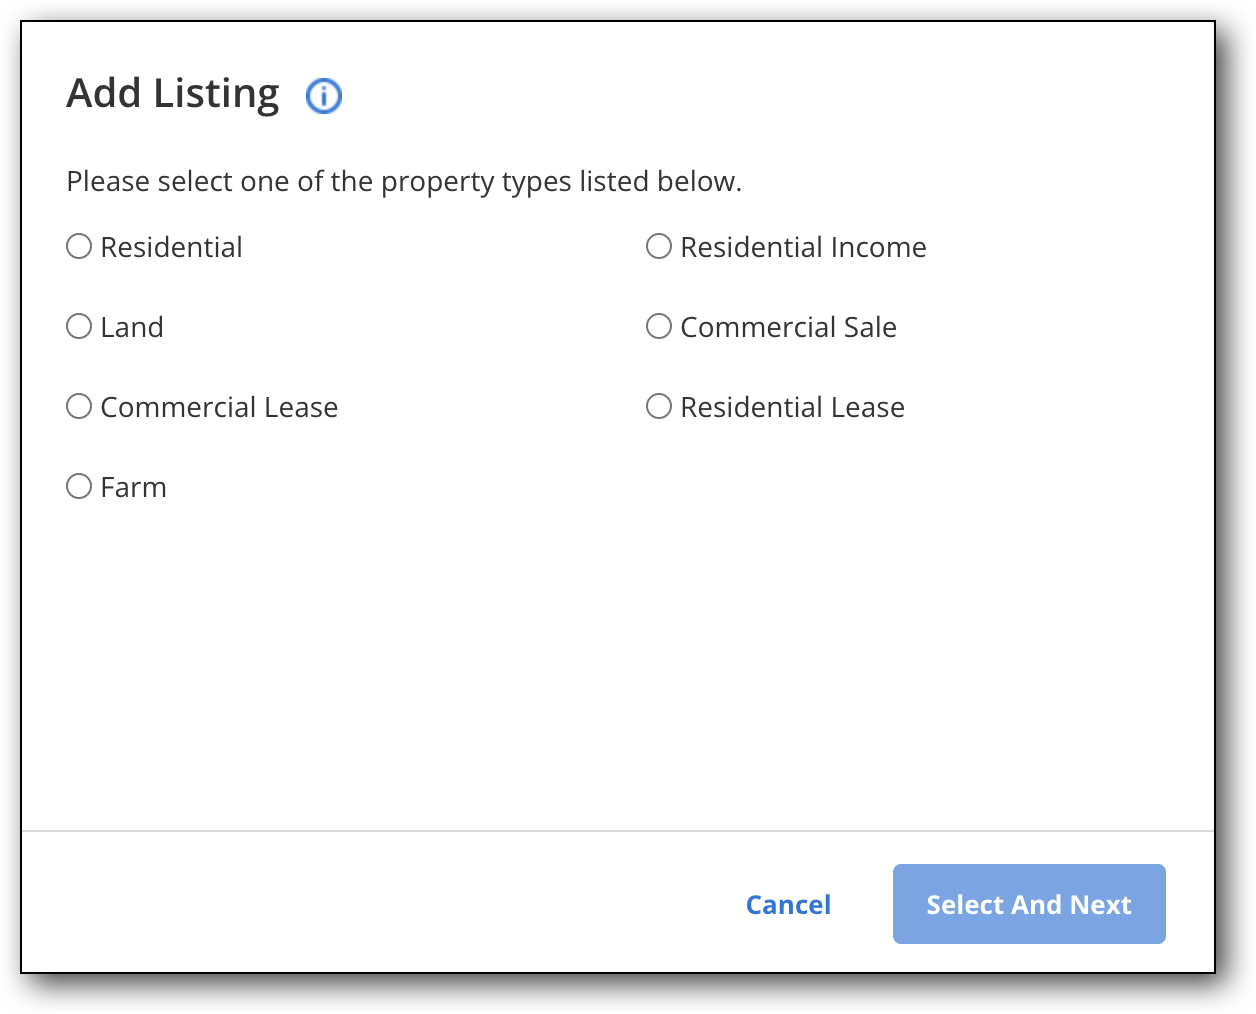 add-listing-select-property-type.png